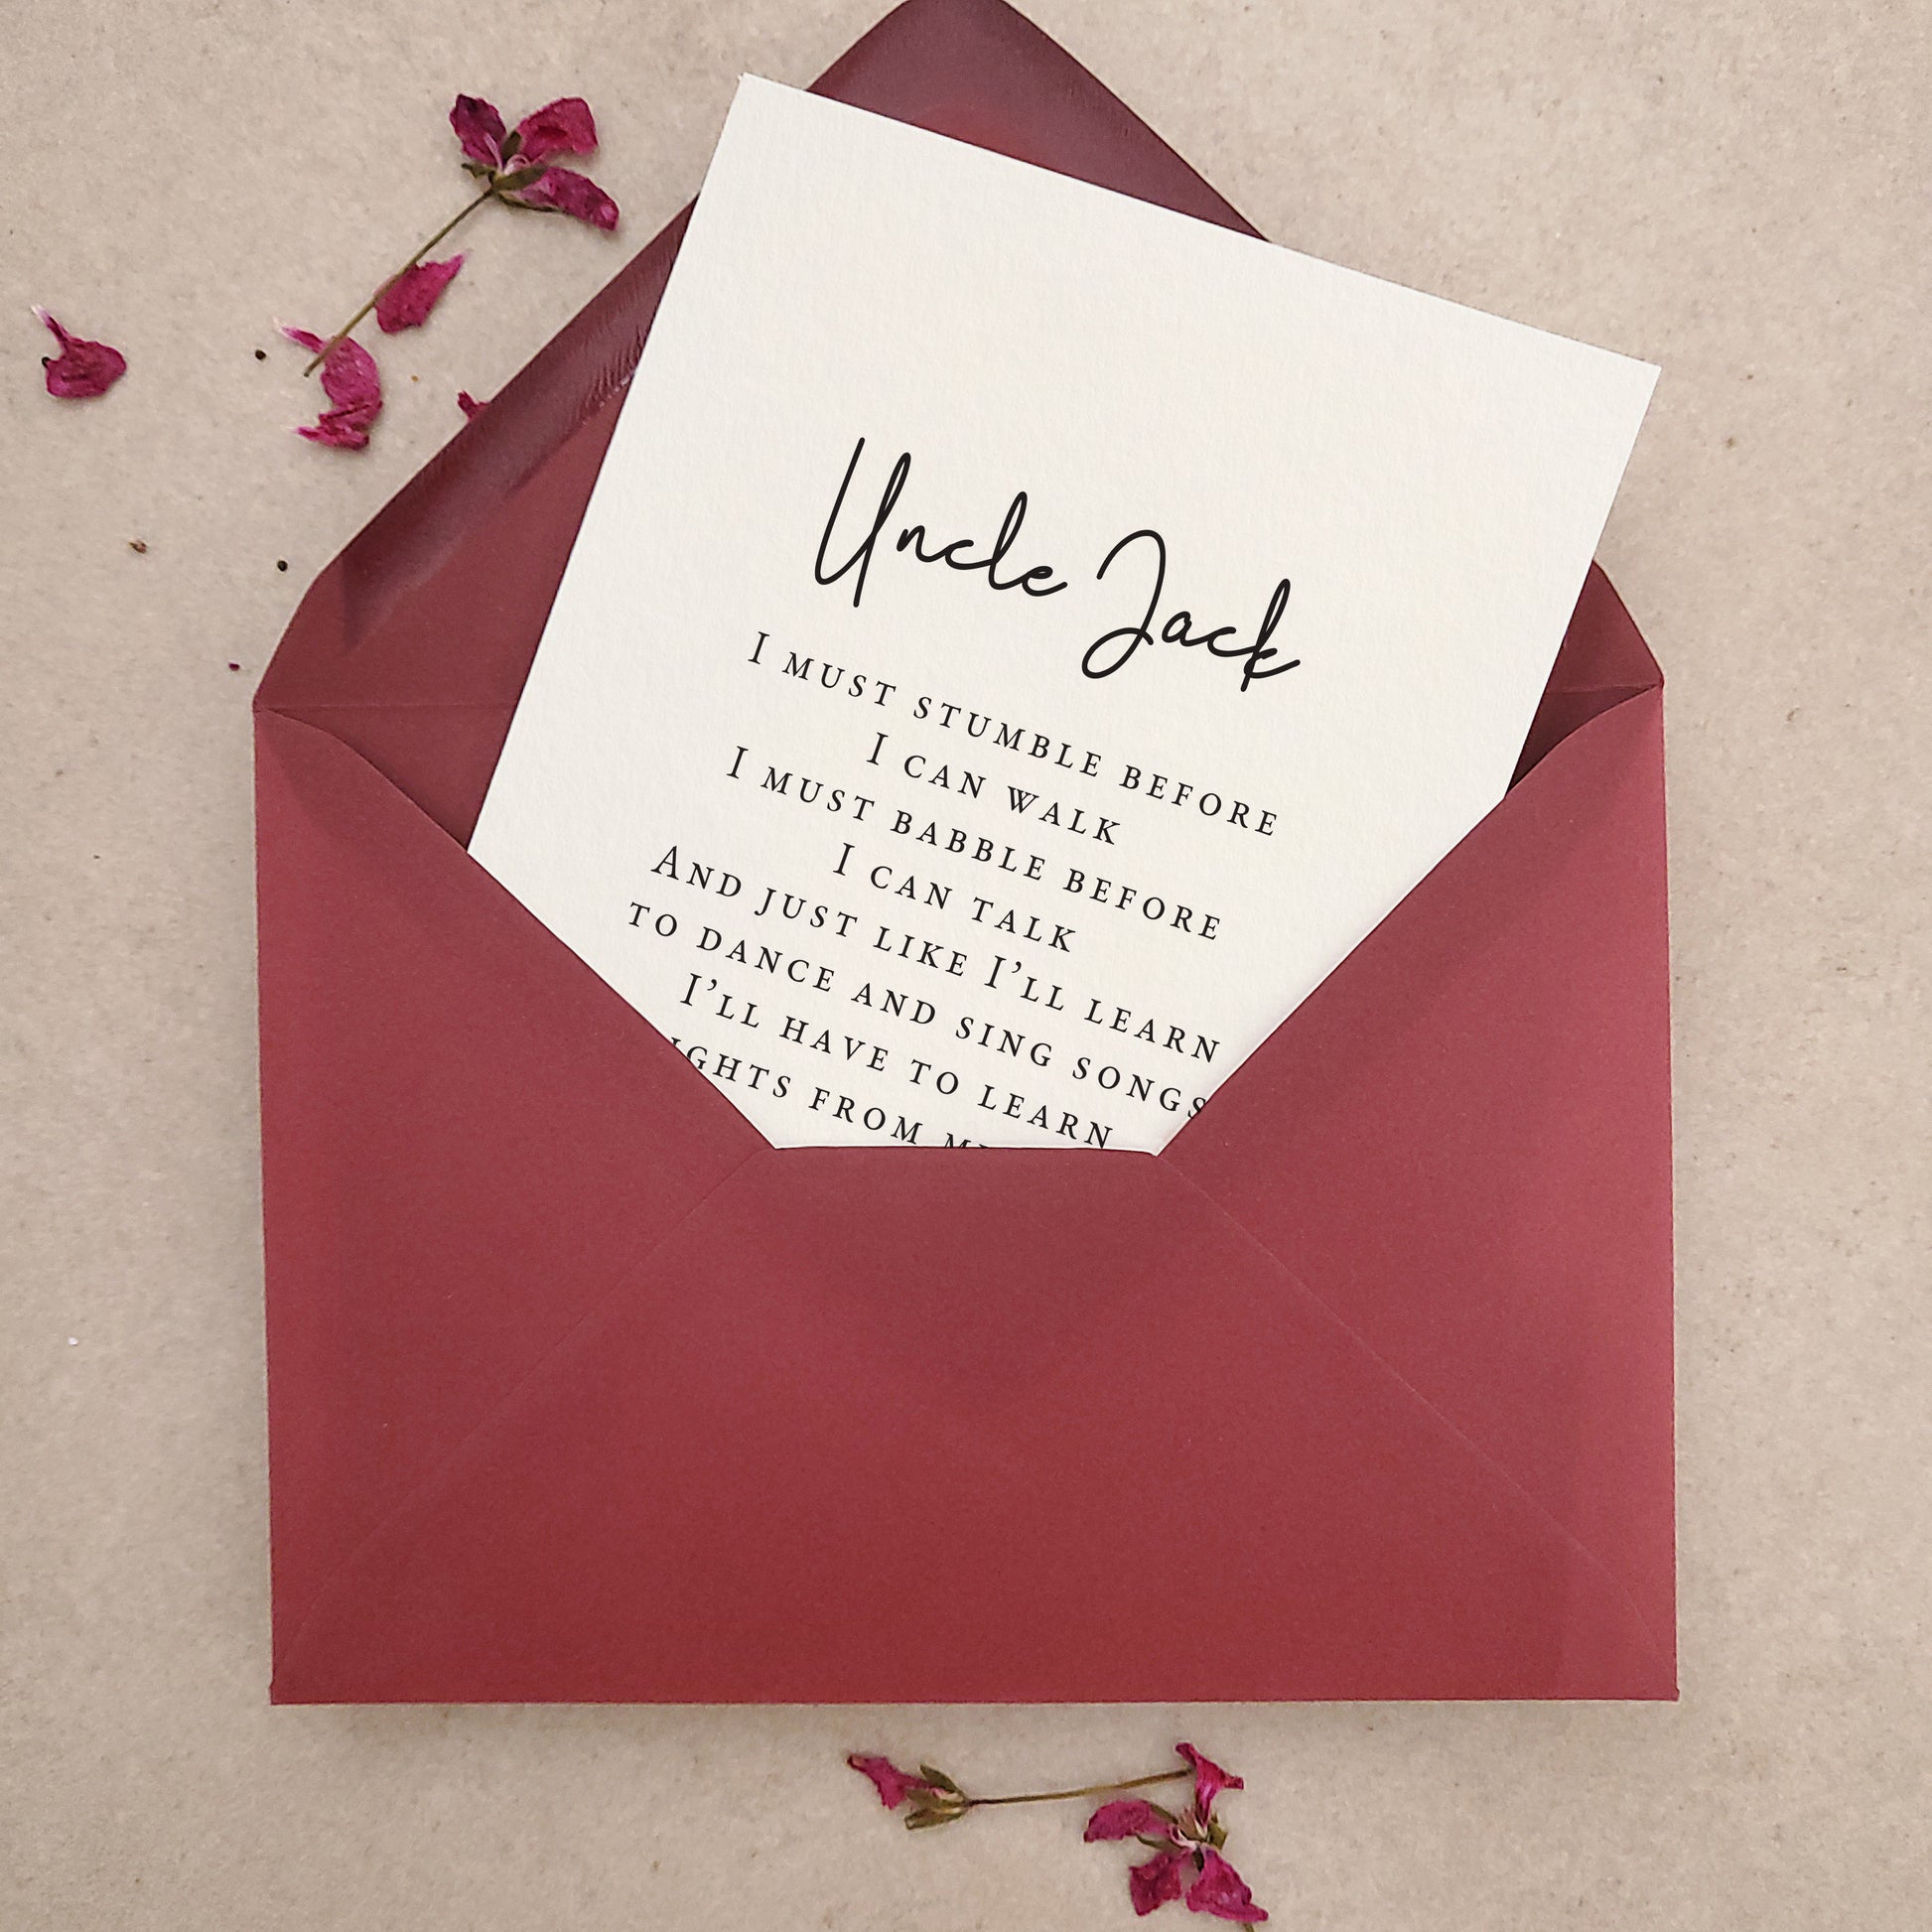 personalized will you be my goftather card - XOXOKristen